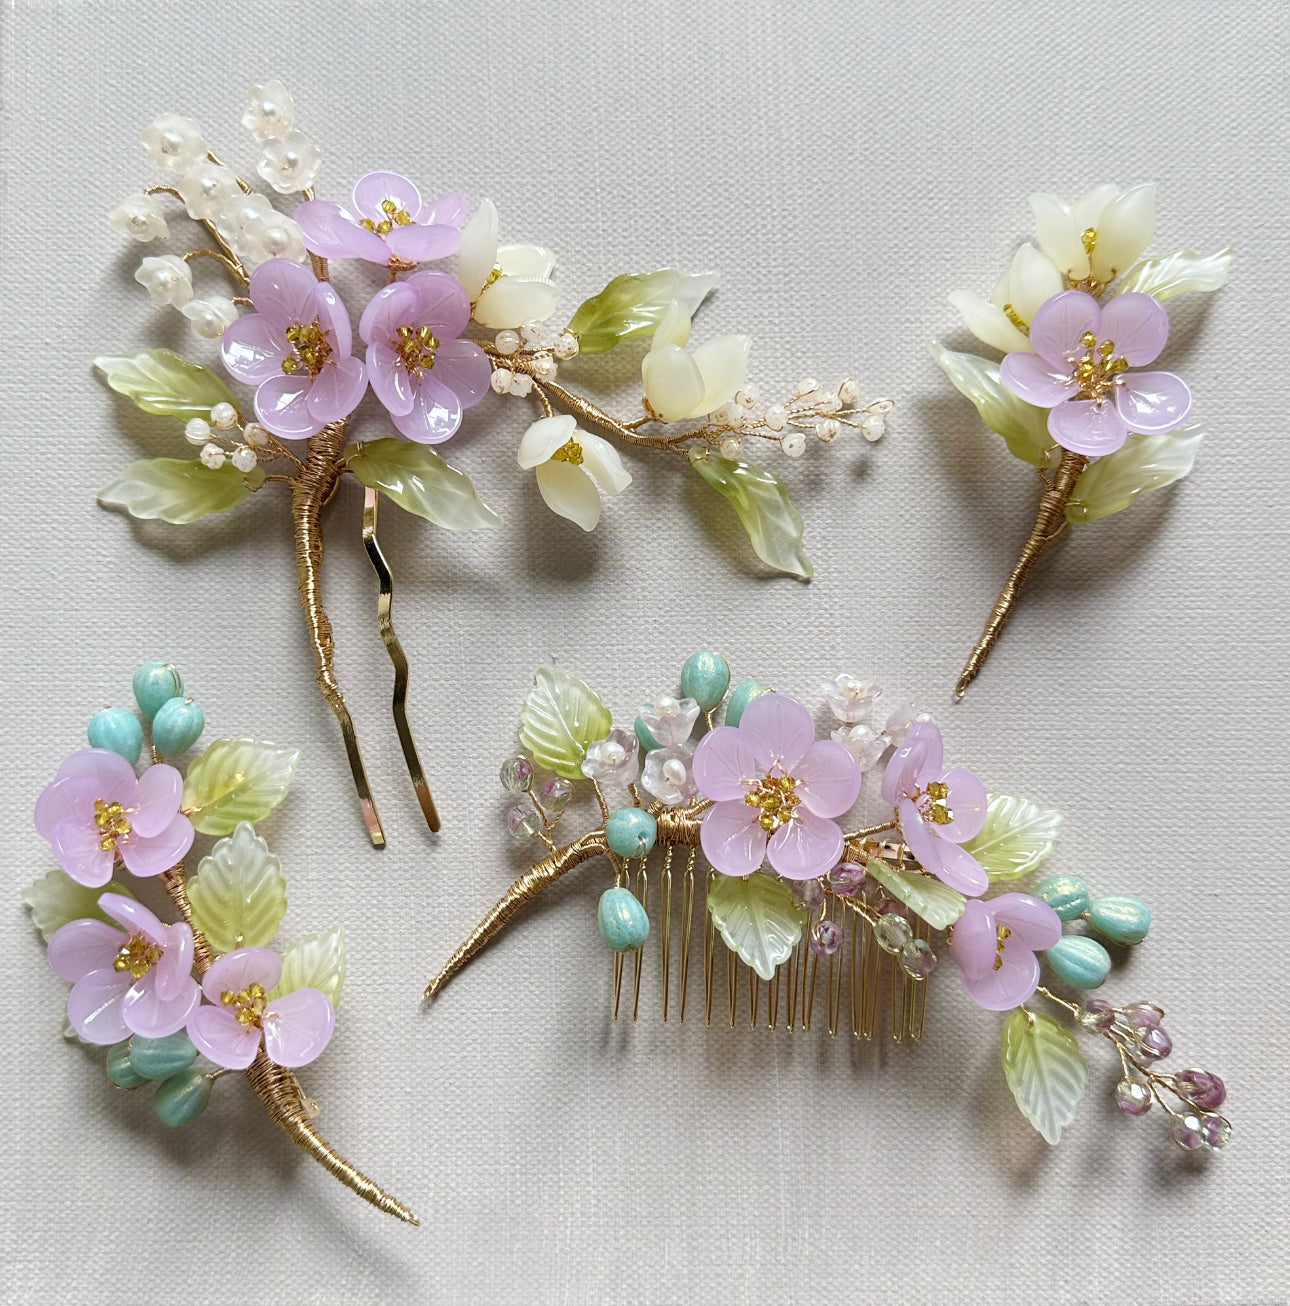 《Anita's Spring Garden》luxurious plum blossom and lily of the valley wedding hairpin